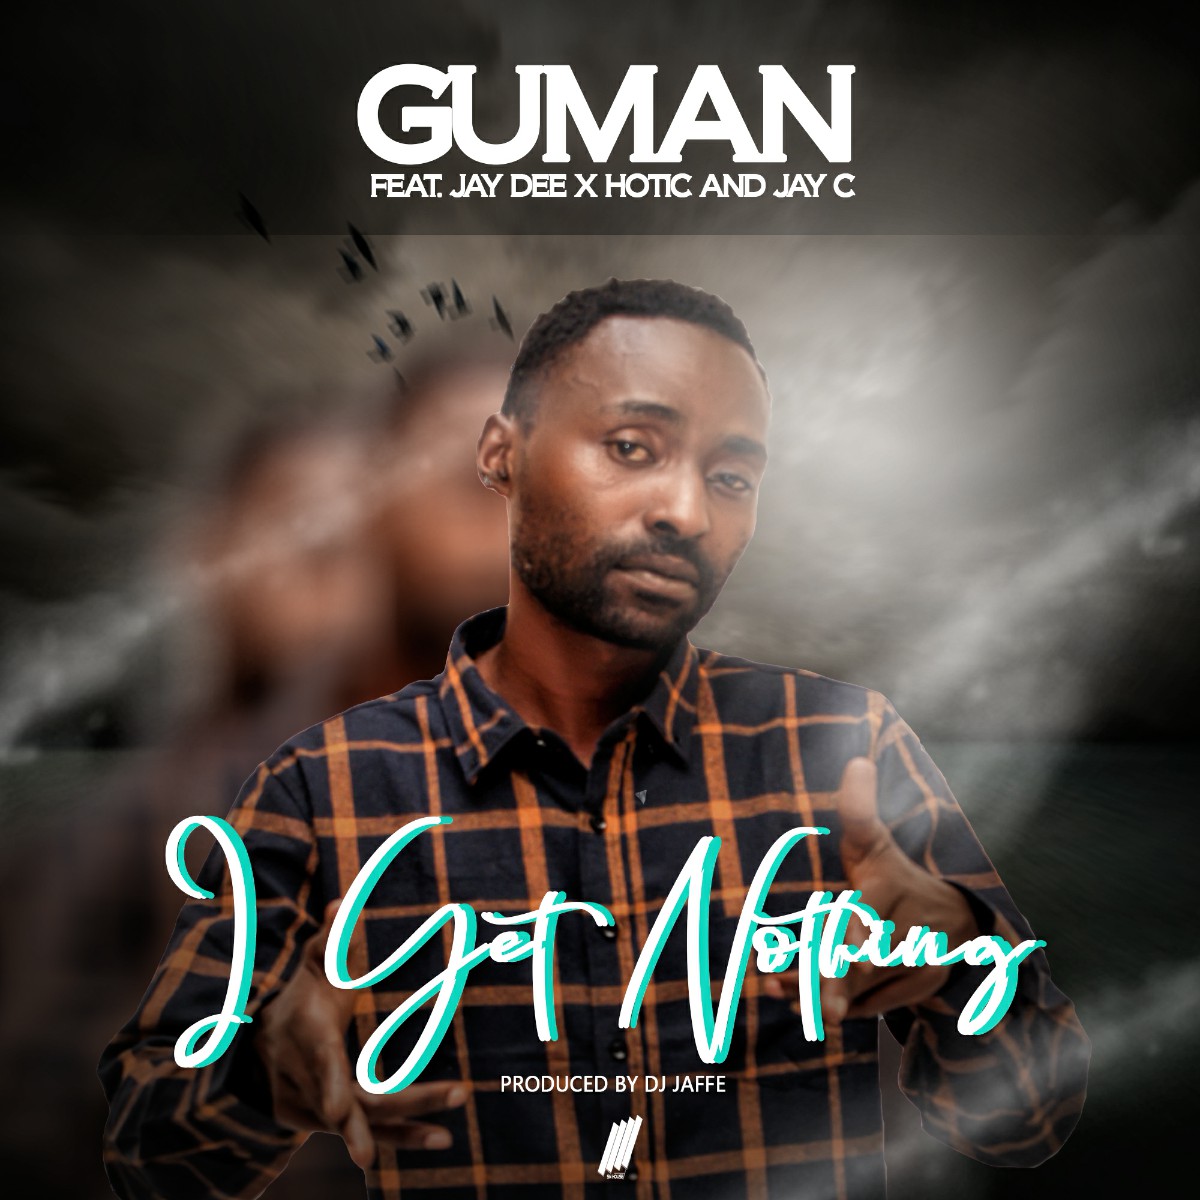 Guman ft. Jay Dee, Hotic & Jay C - I Get Nothing